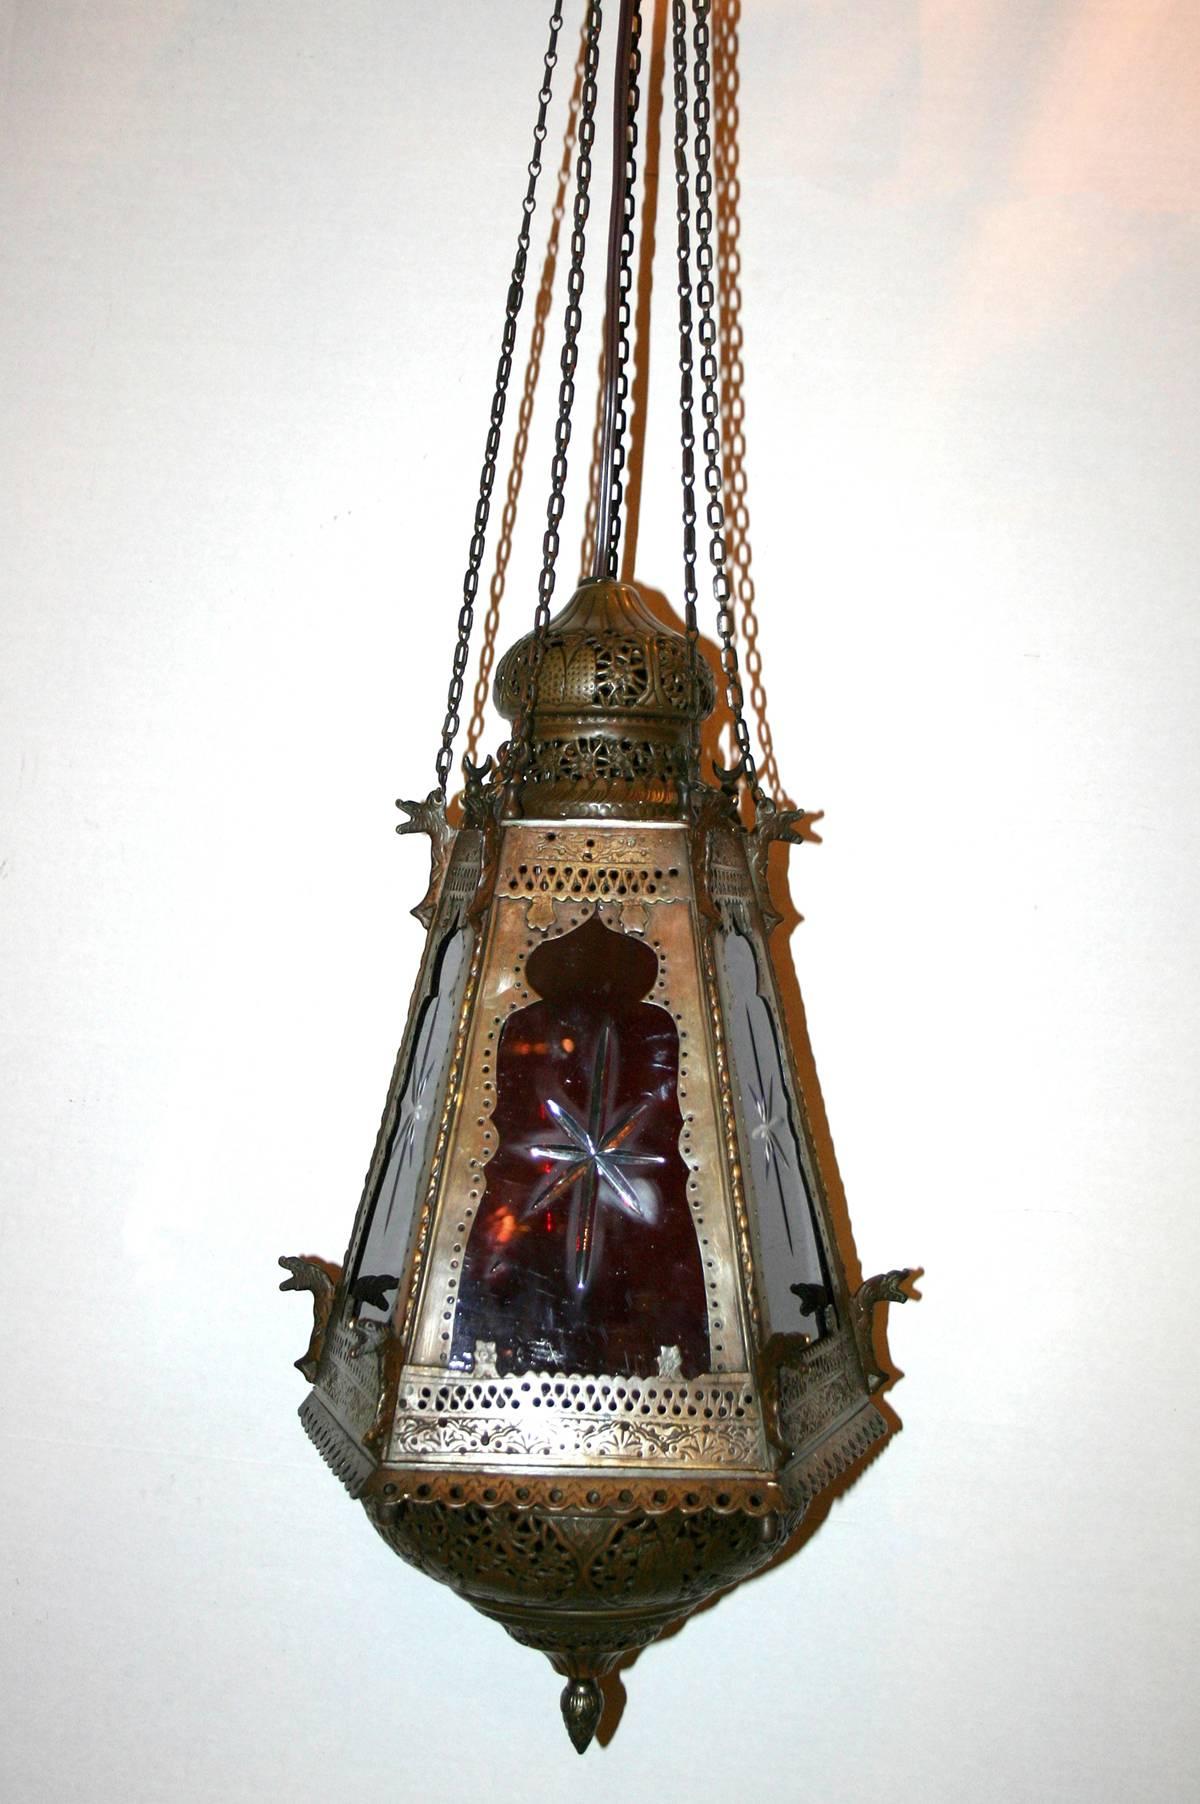 A circa 1900 Turkish pierced patinated brass lantern with original etched glass insets in red, blue and green colors. Interior light.
 Measurements:
Height: 35″ (adj.) drop
Diameter: 10″